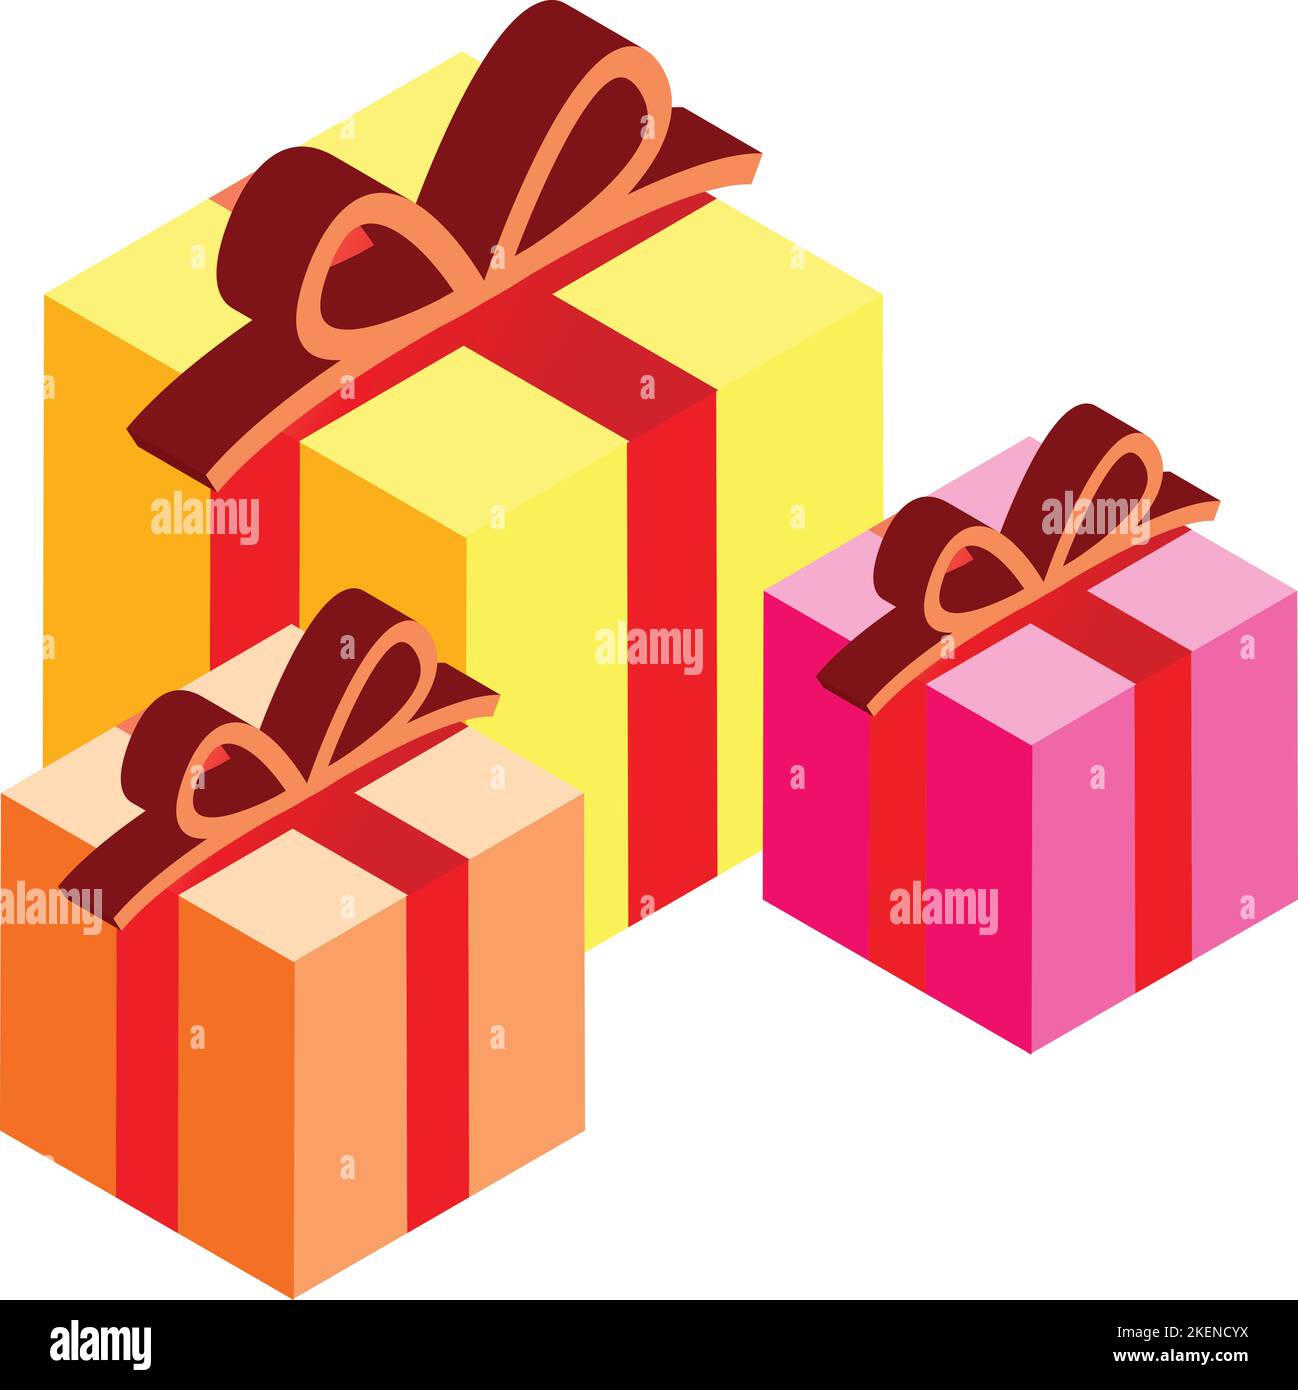 stacked gift boxes illustration in 3D isometric style isolated on background Stock Vector